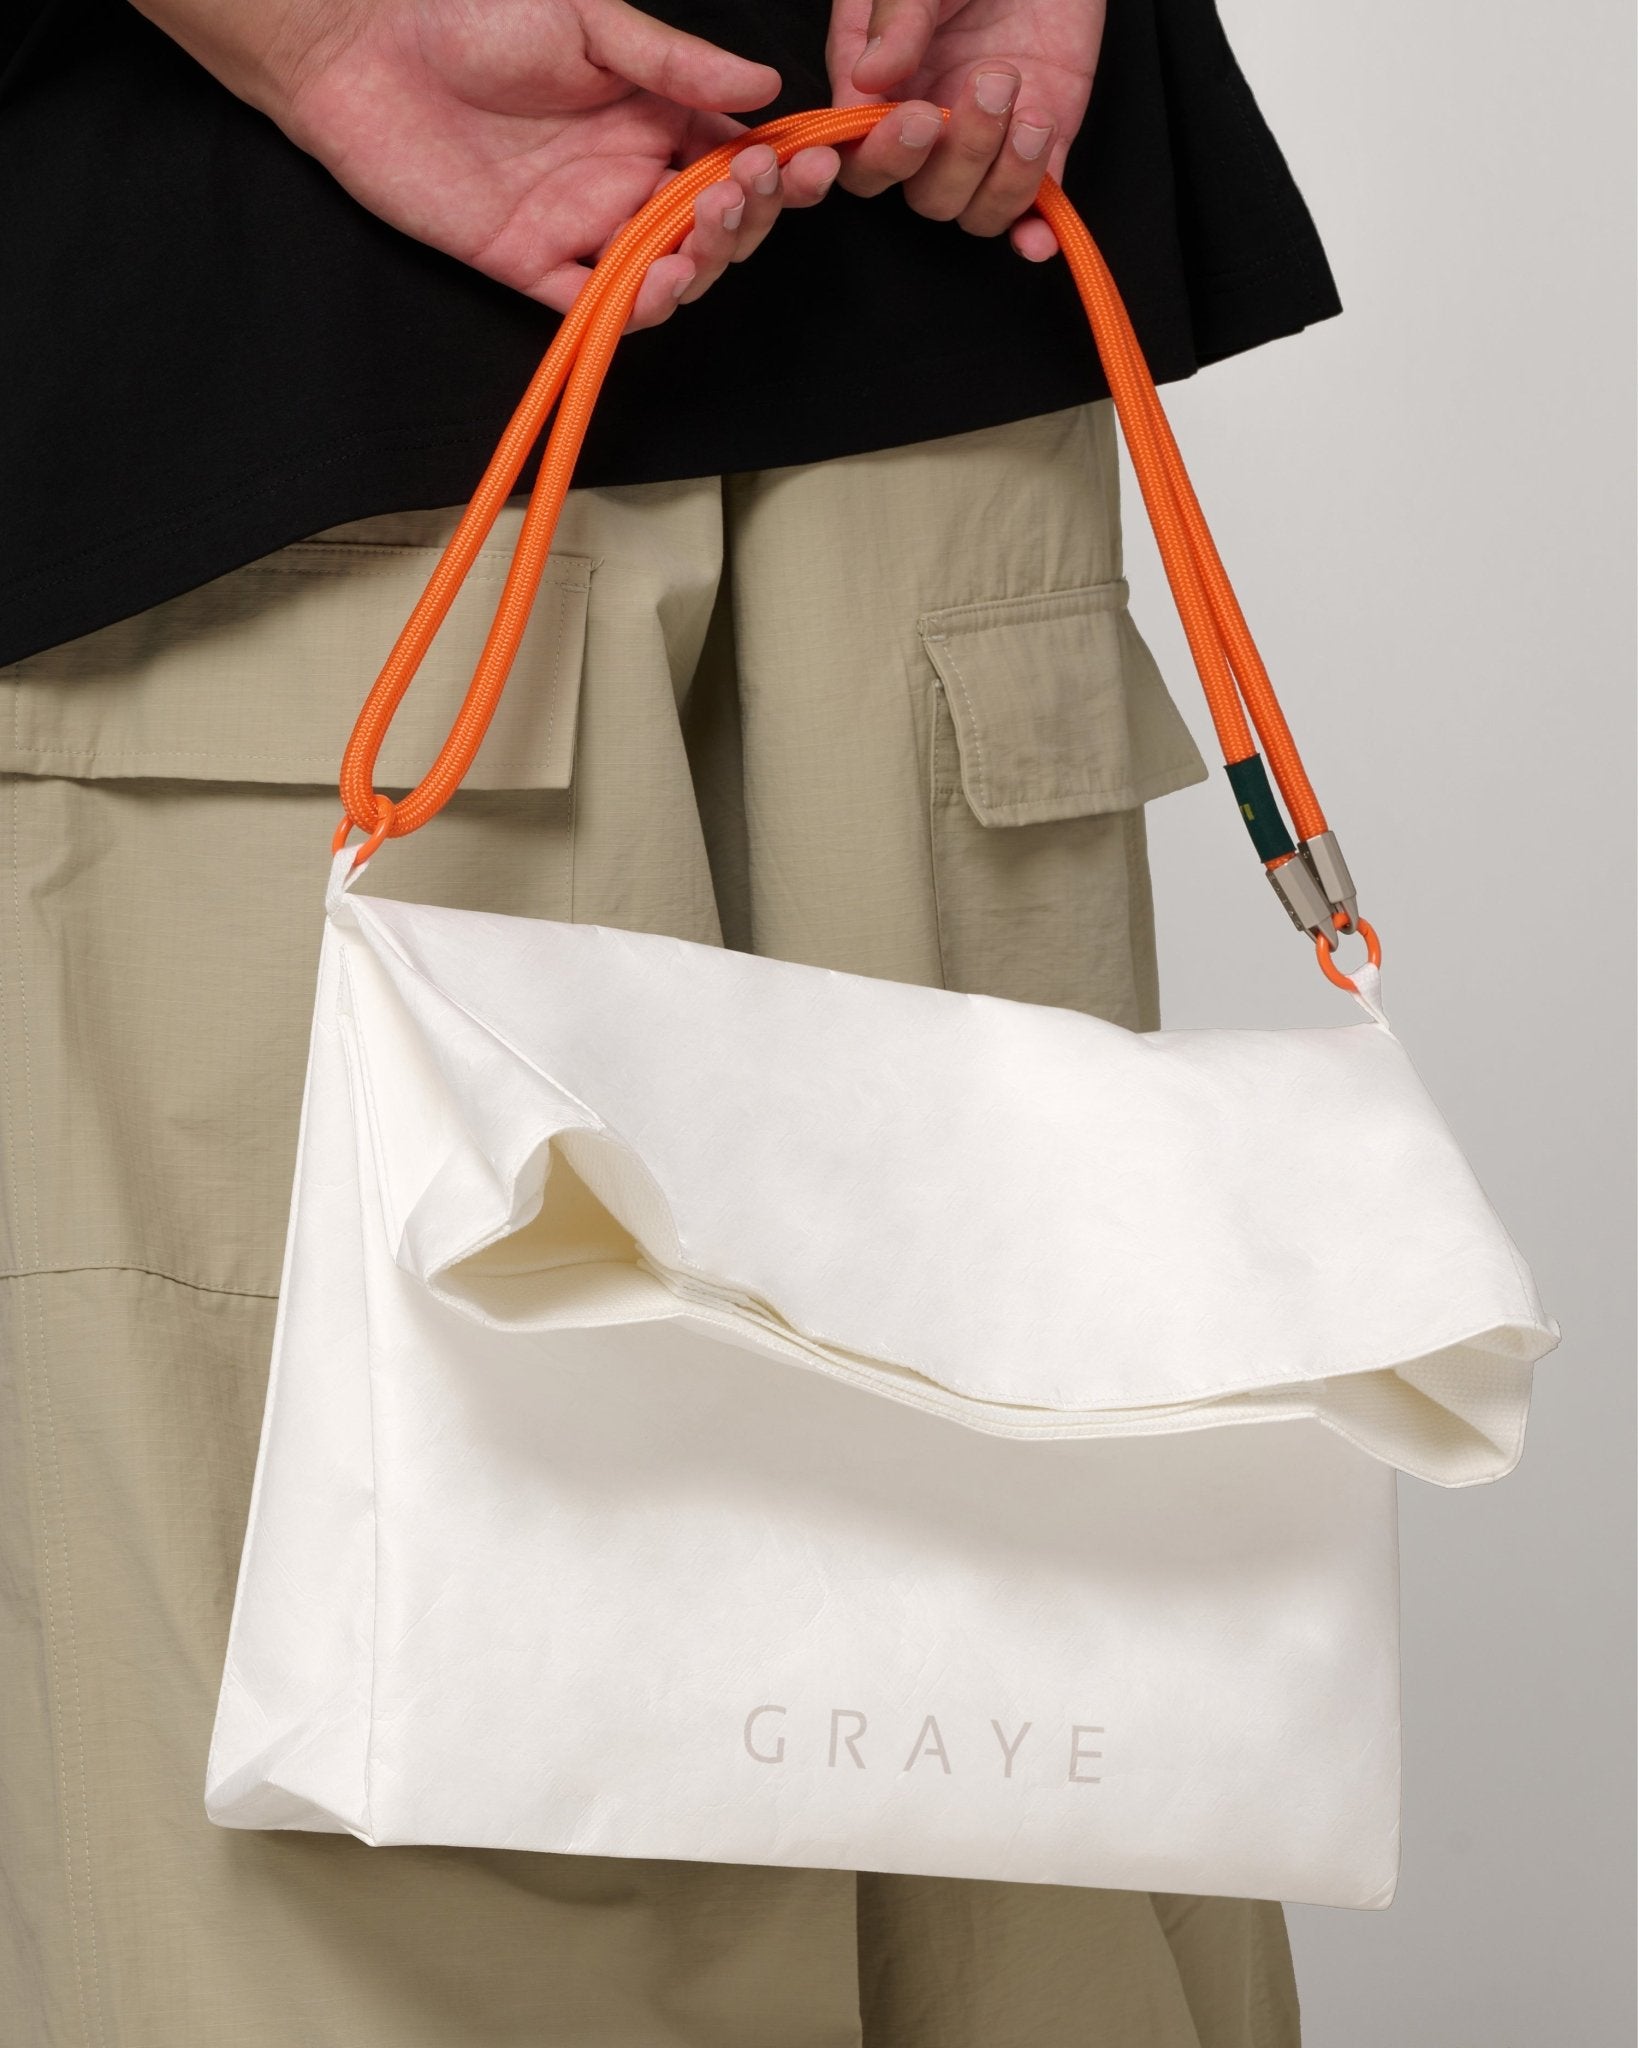 Reusable Tyvex Store Tote - G R A Y E